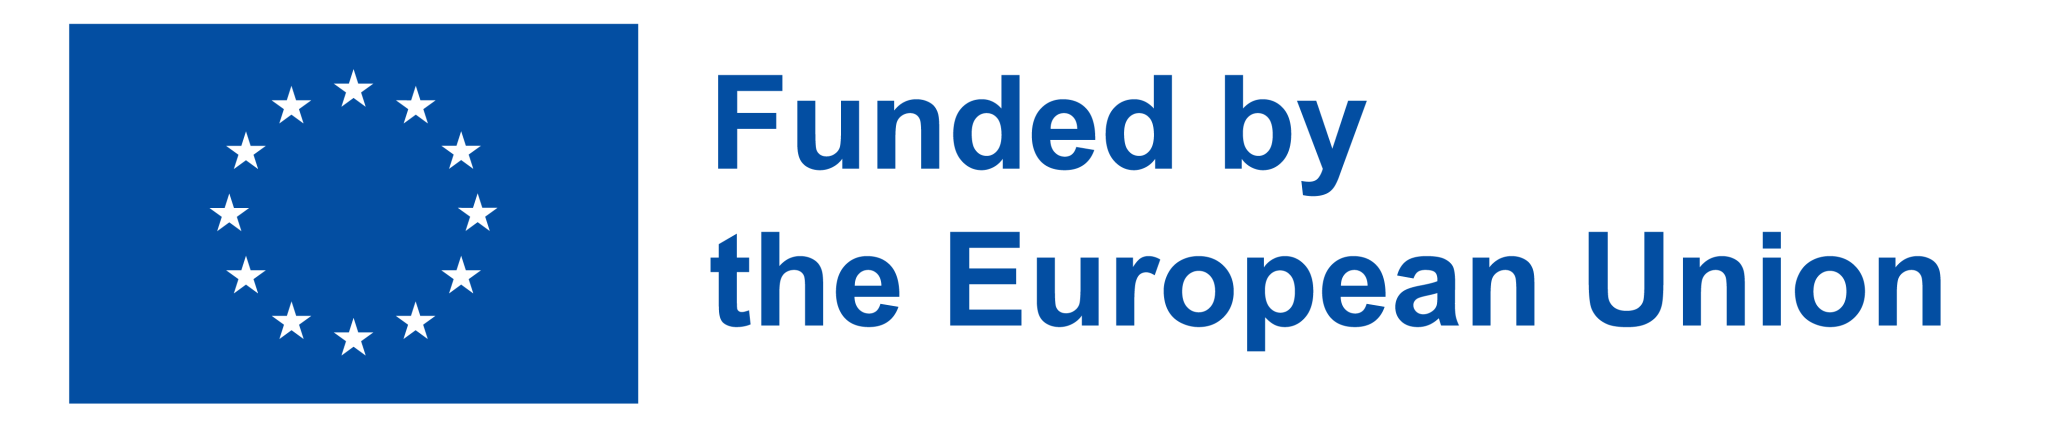 funded_by_eu.png